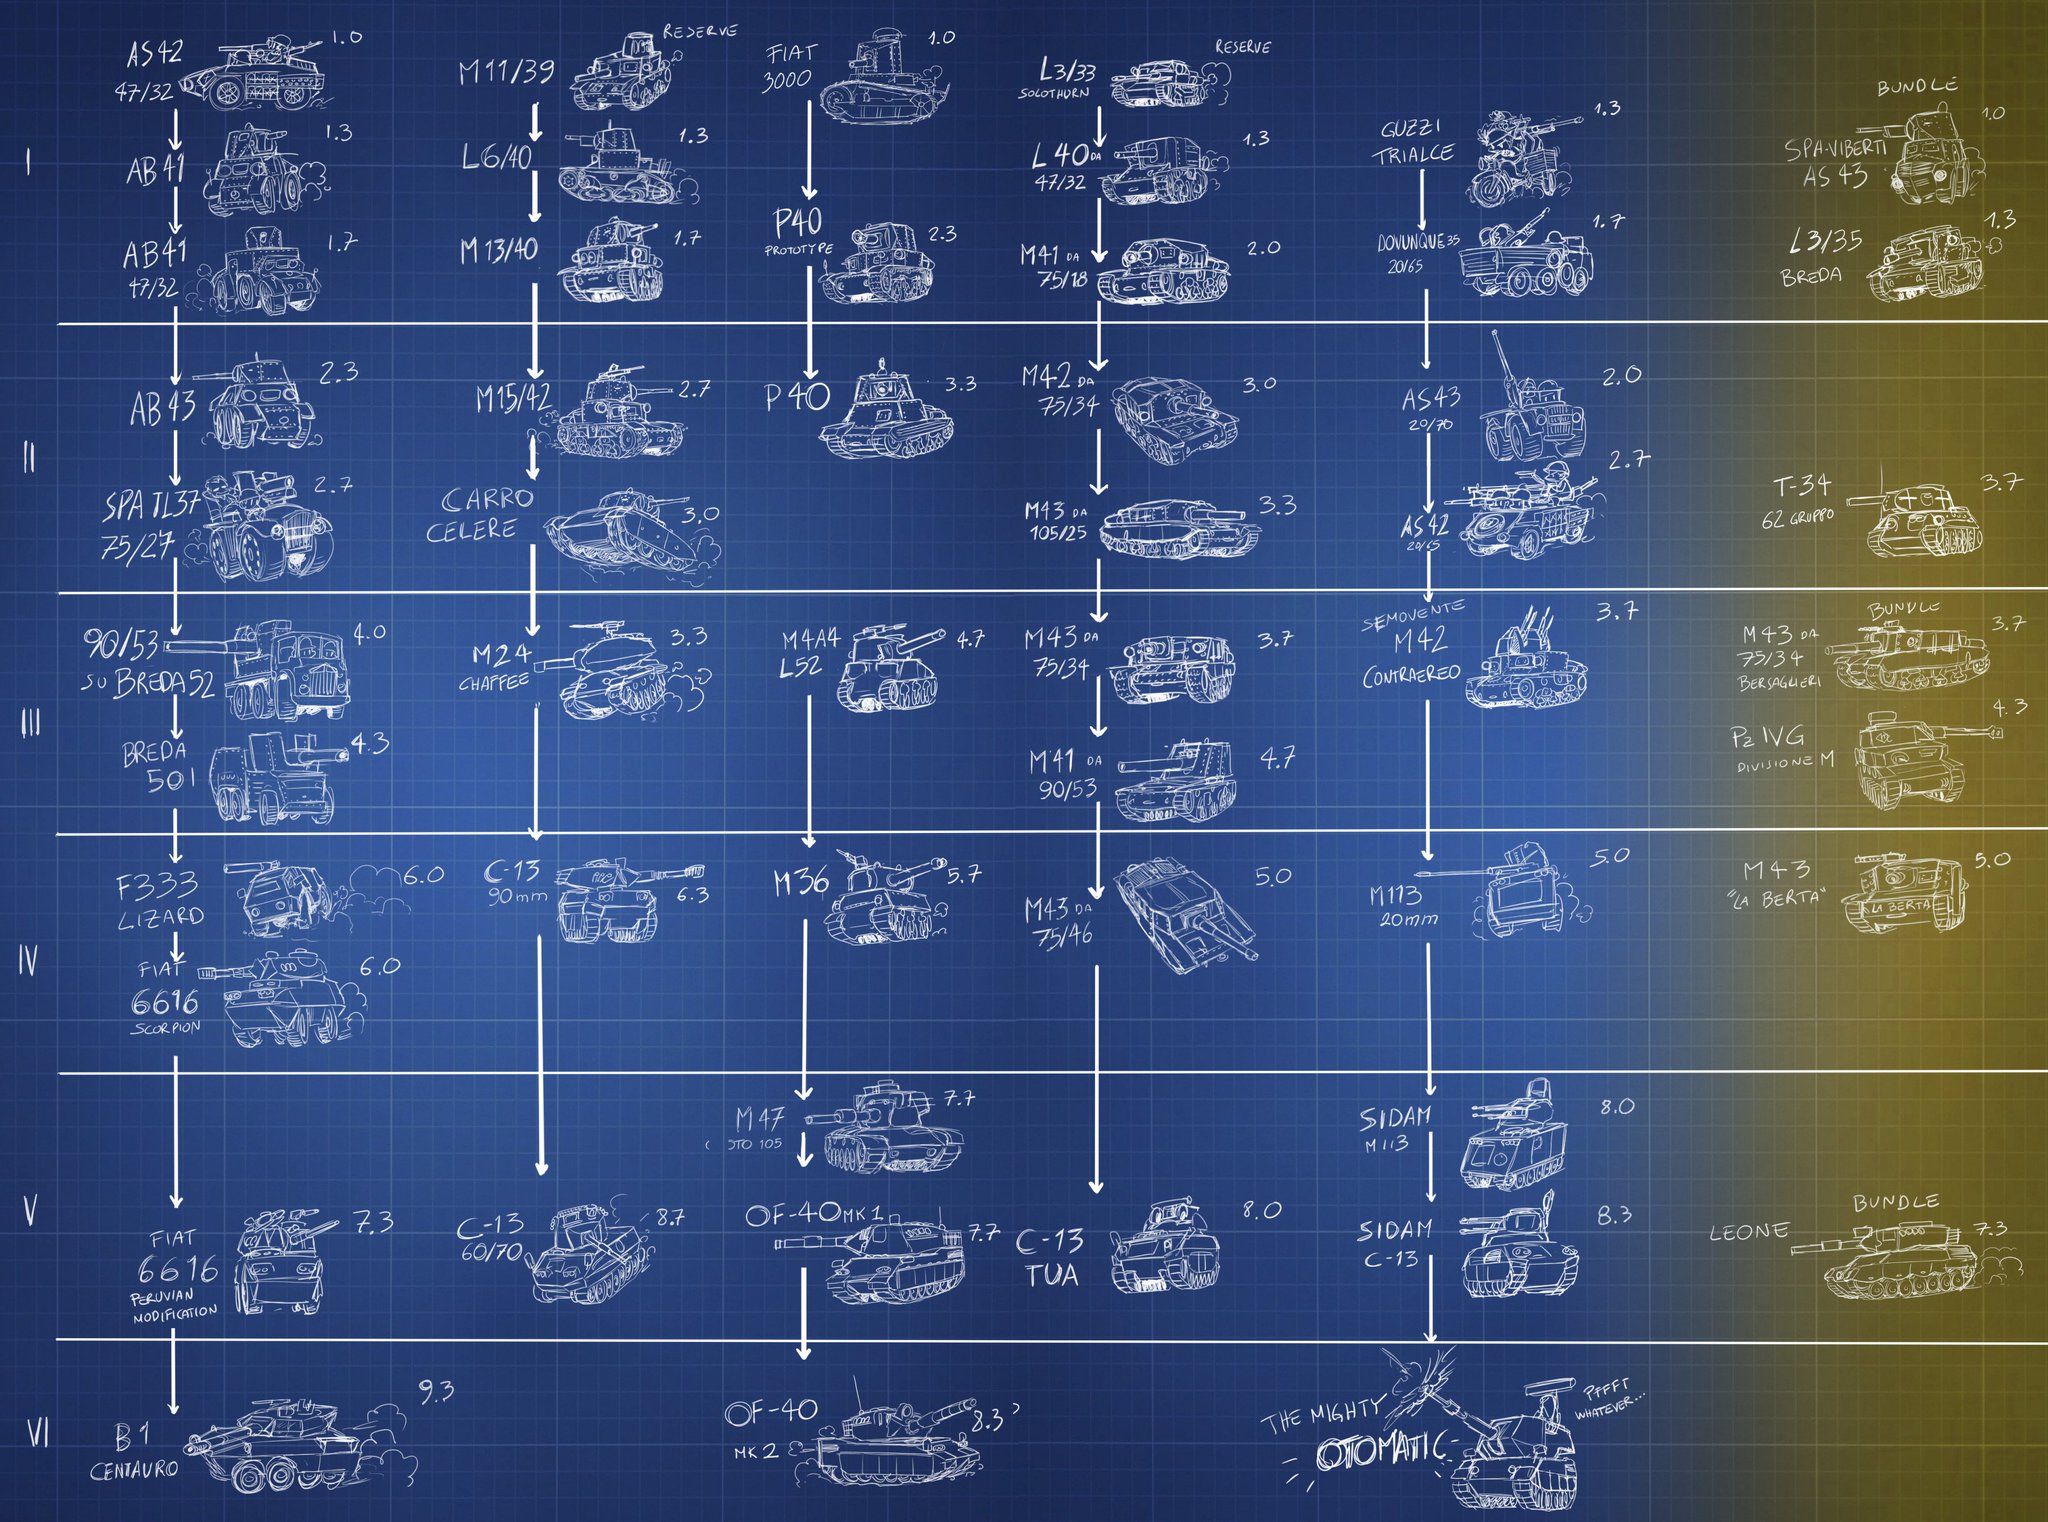 War Thunder Italian Tech Tree Not Official But Fan Made By Angelo From Angelo S World Do You Like It Let Us Know What You Would Change Check Out His Other Creations